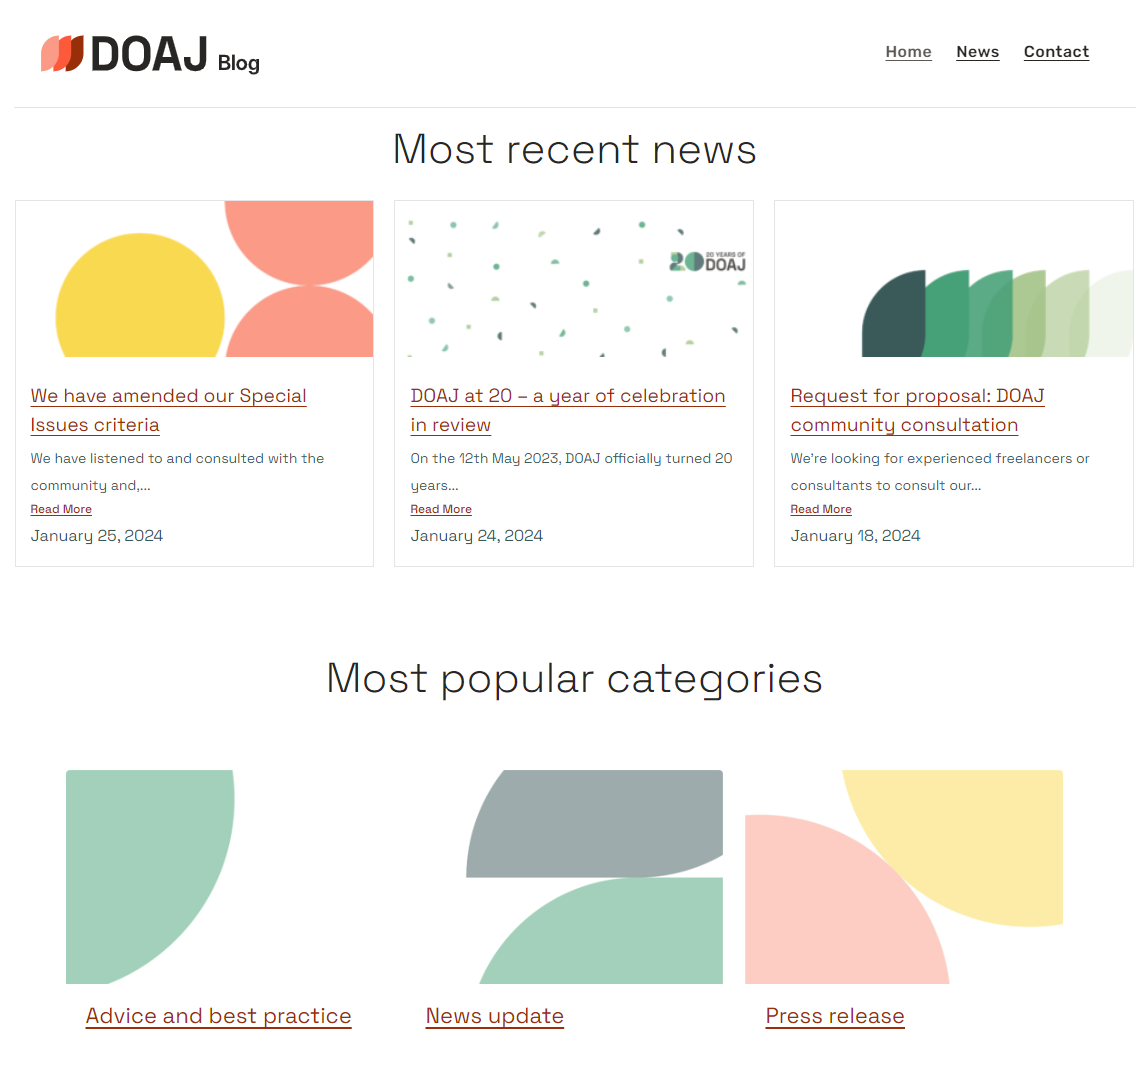 A screenshot of a preview of the new blog, showing the DOAJ logo top left, followed by a 'Most recent news' section and a 'Most popular categories' section